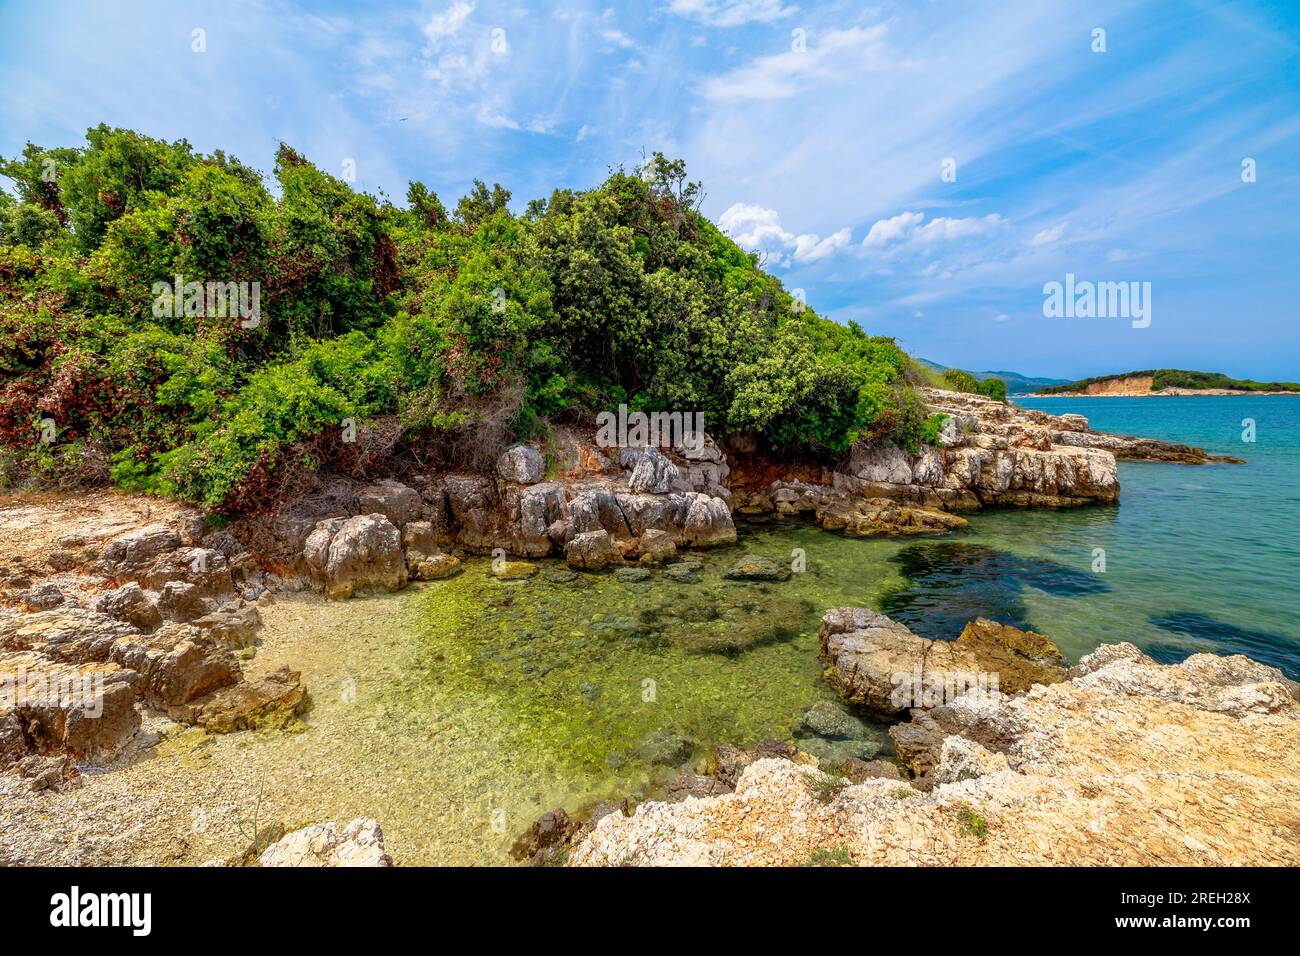 boat trip around reef of the Ksamil Islands, eager to explore the captivating beauty of Ksamil archipelago of Albania. Stock Photo